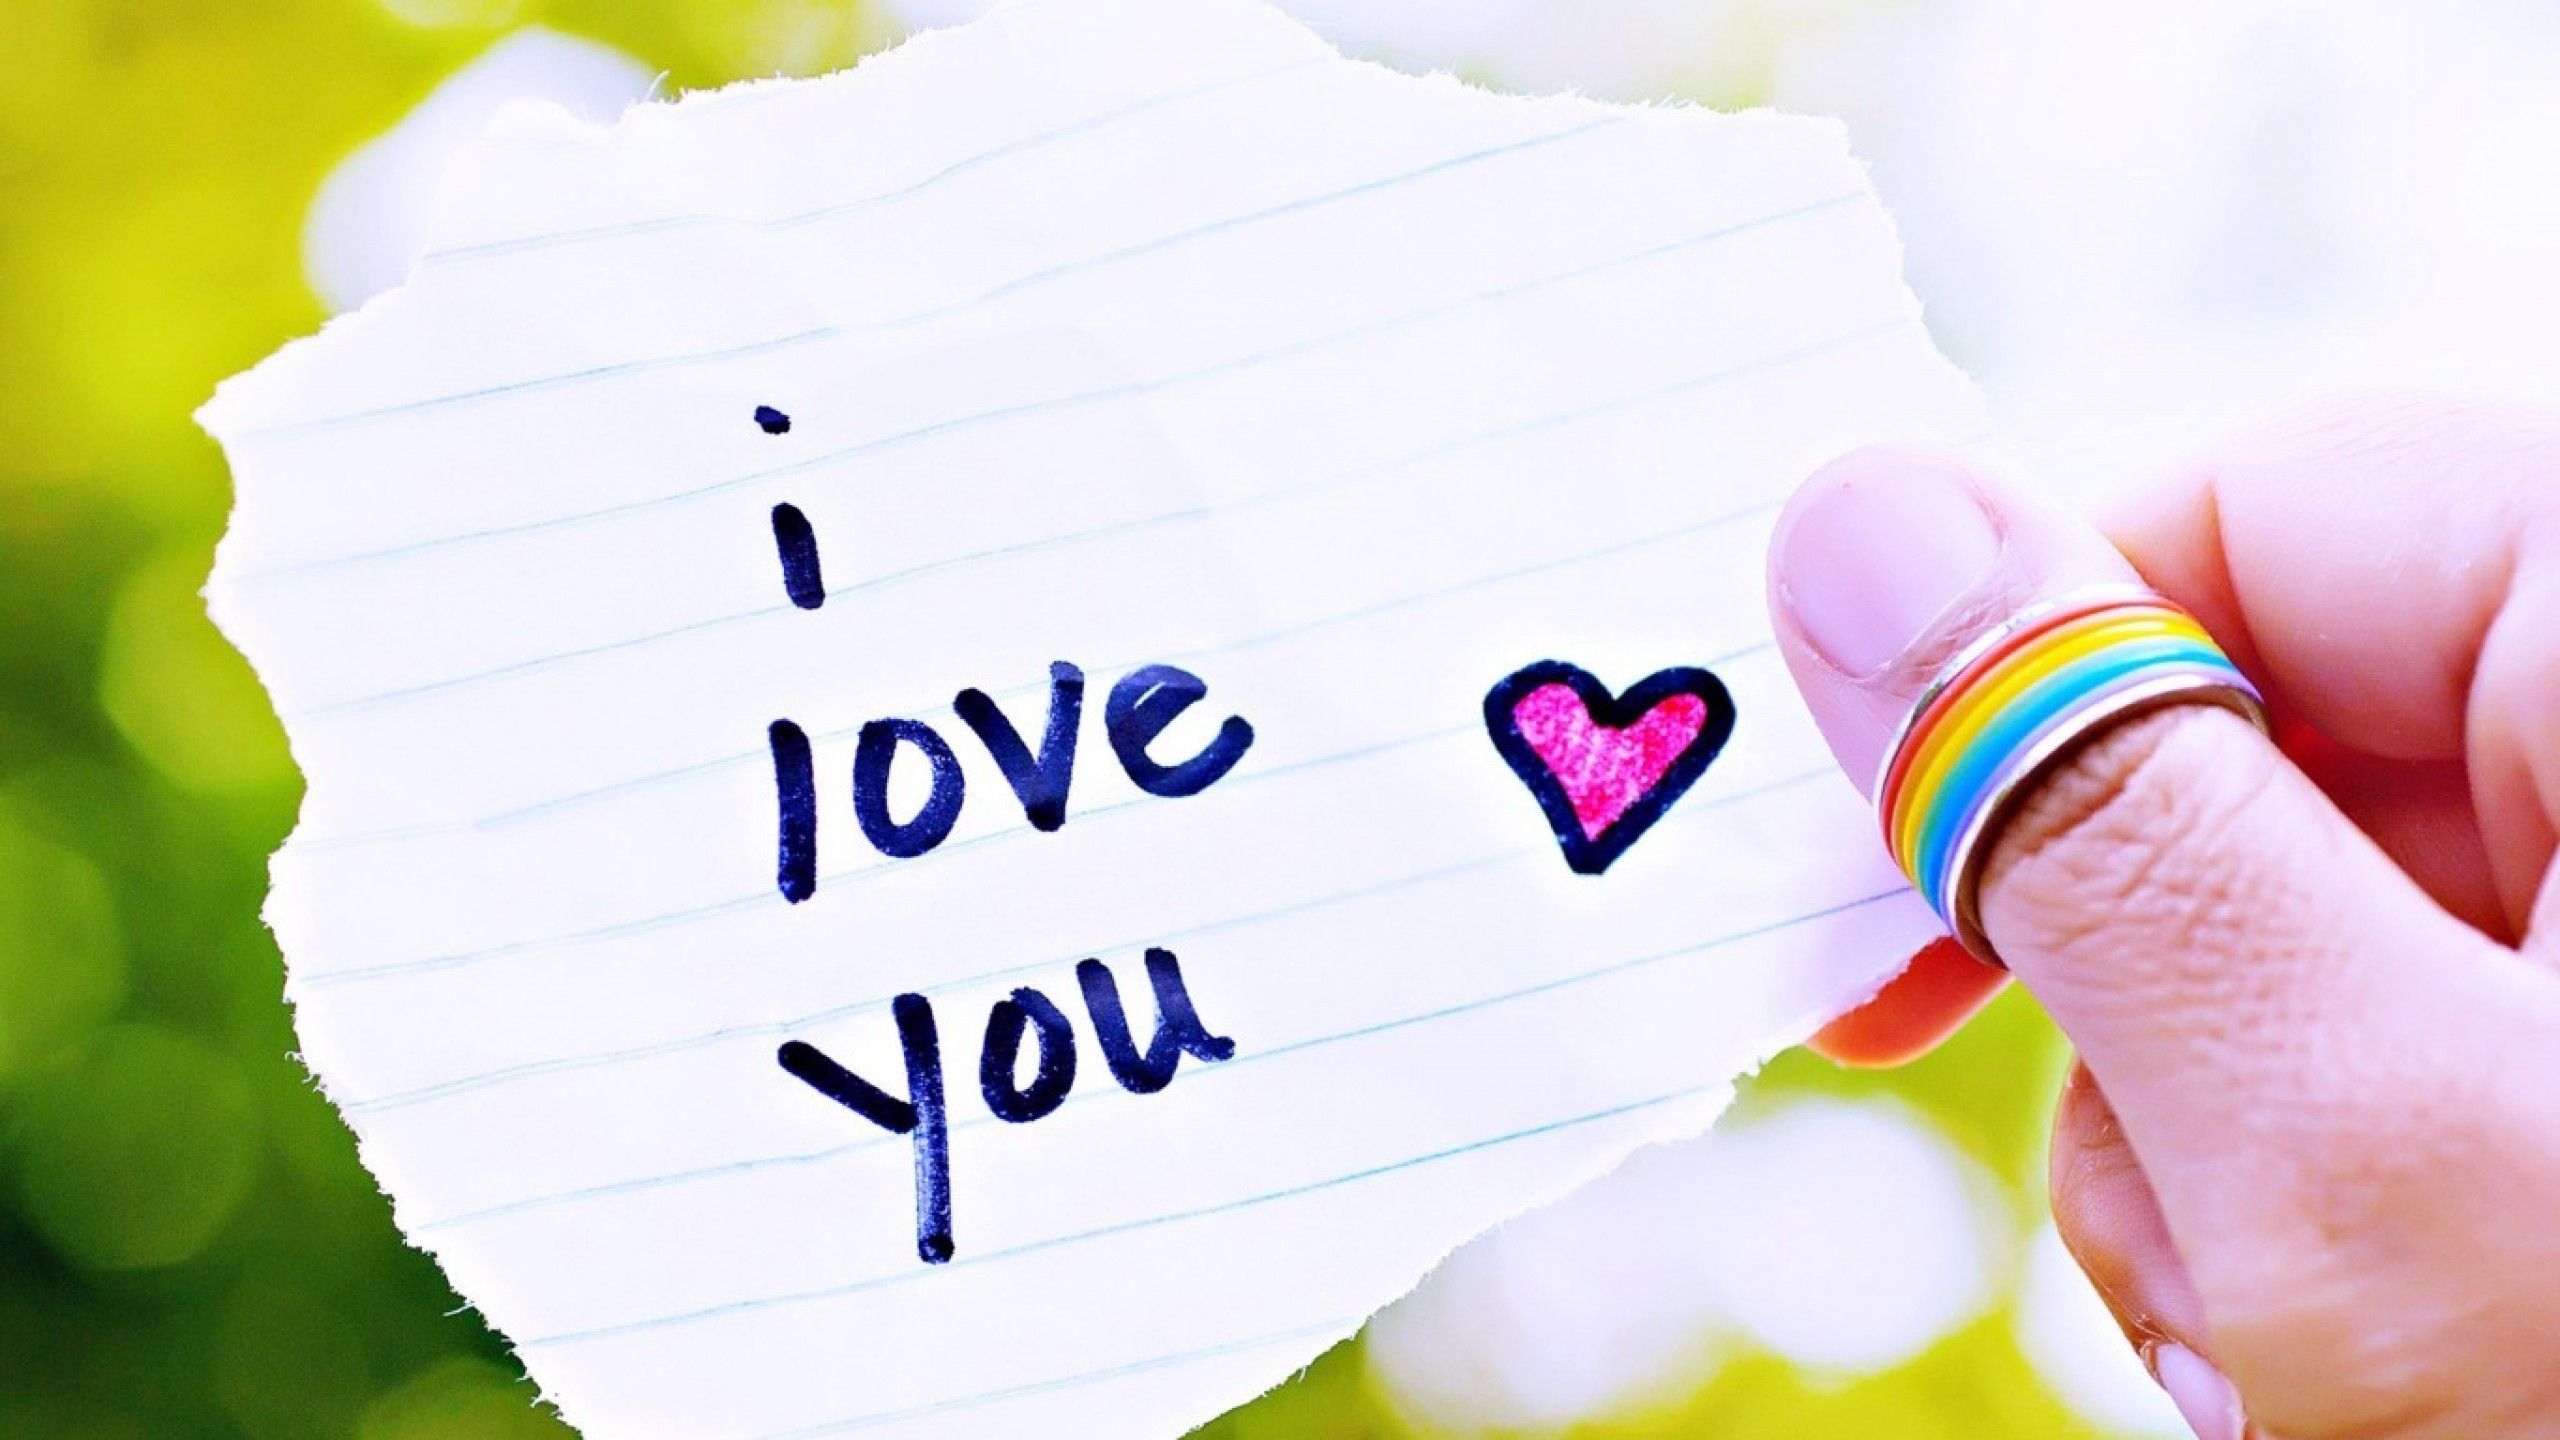 I Love You HD Wallpaper Image Pictures Quotes Photos Cover